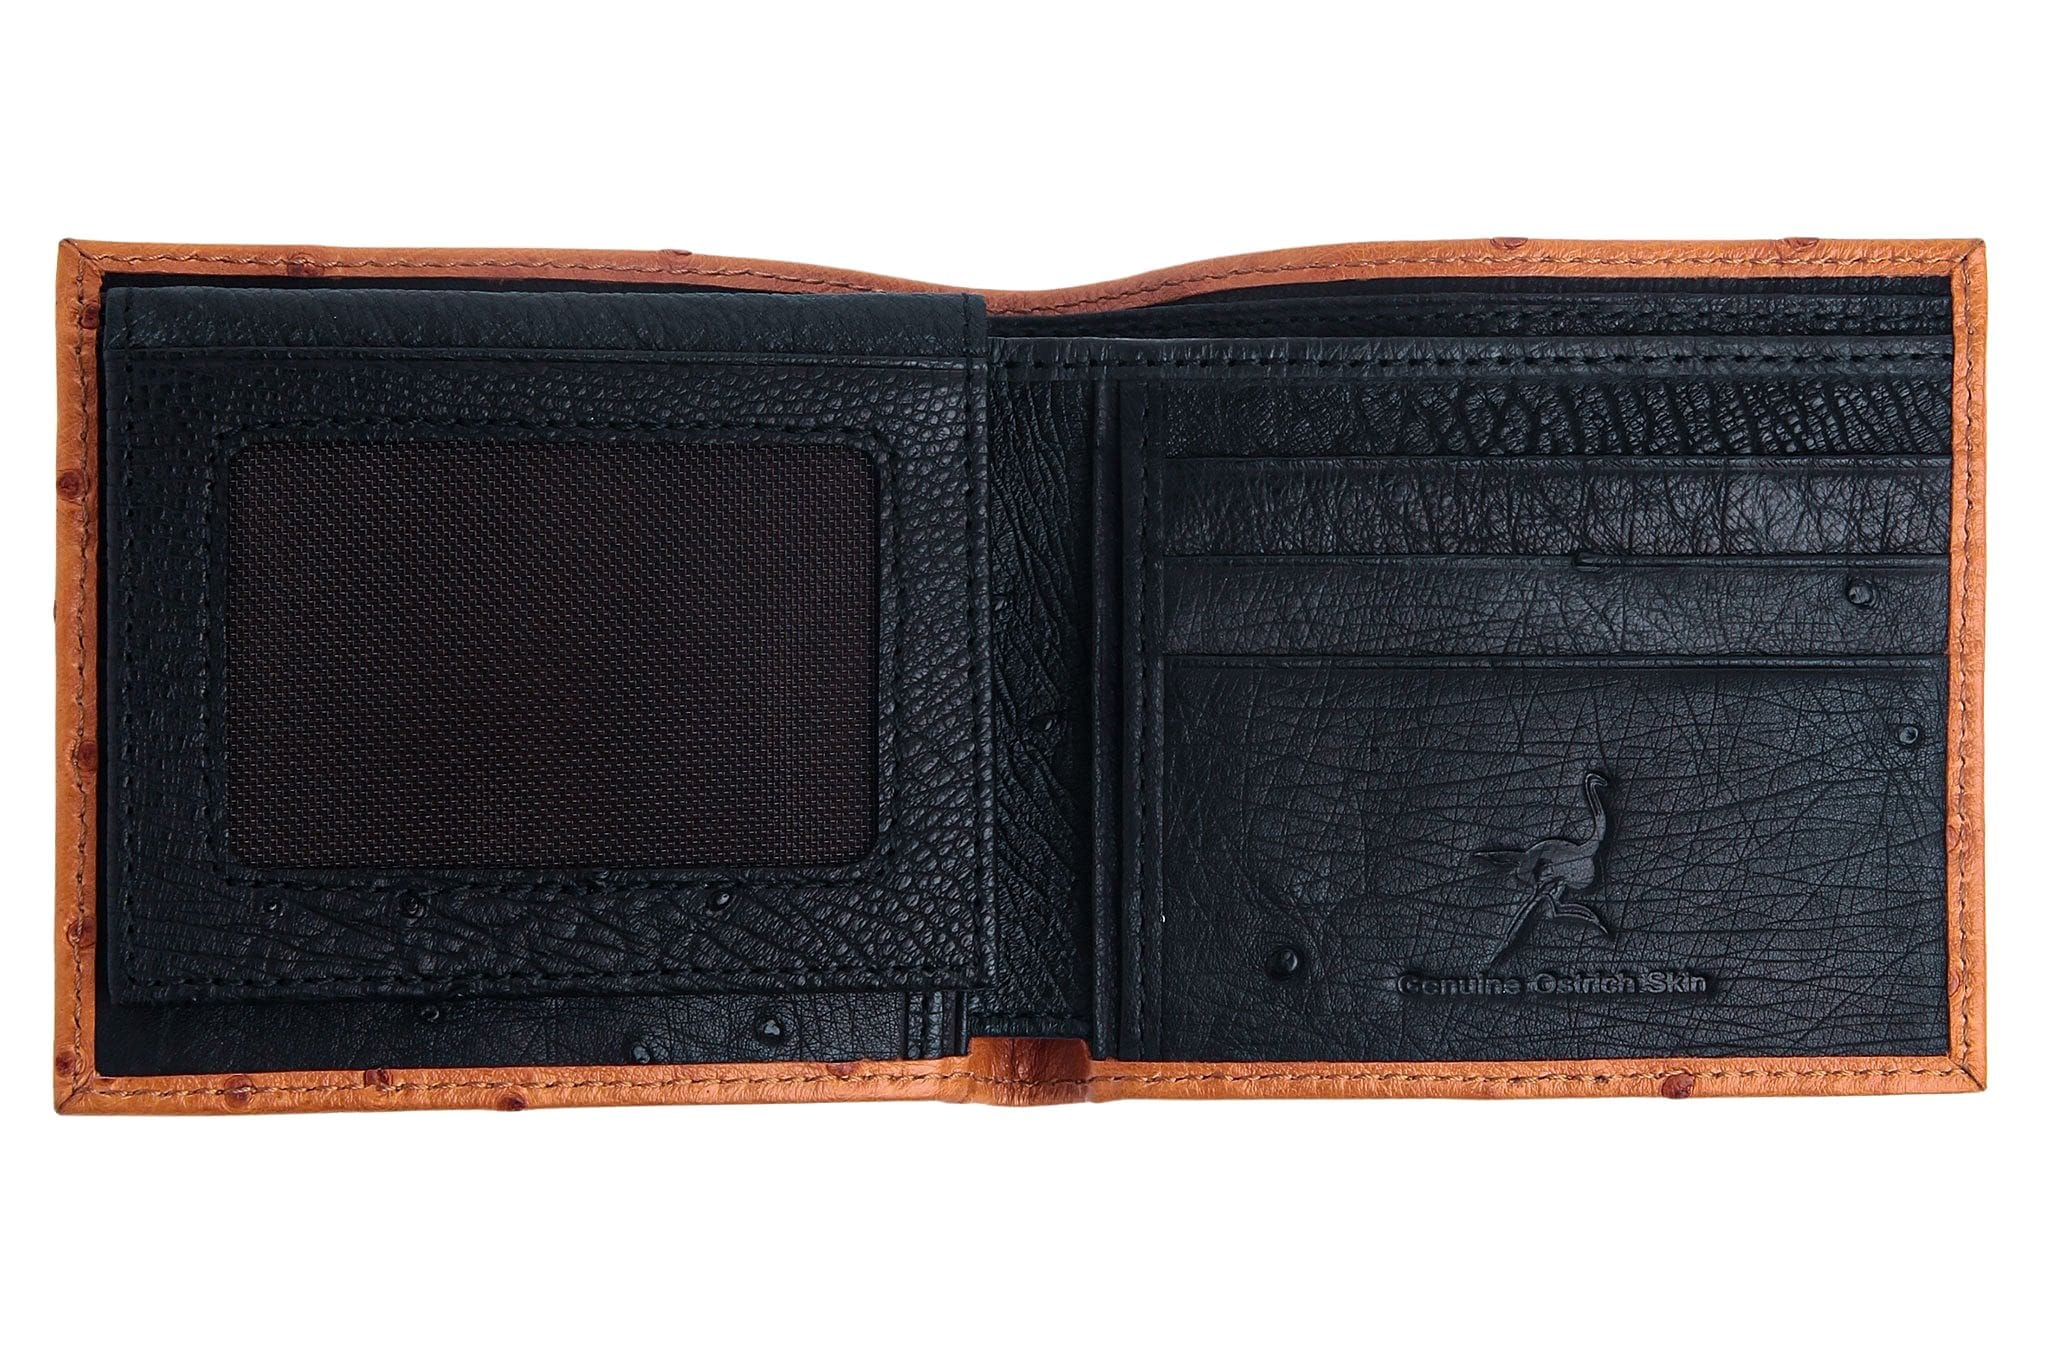 Ostrich Leather Wallets and The Things You Need to Know About Them